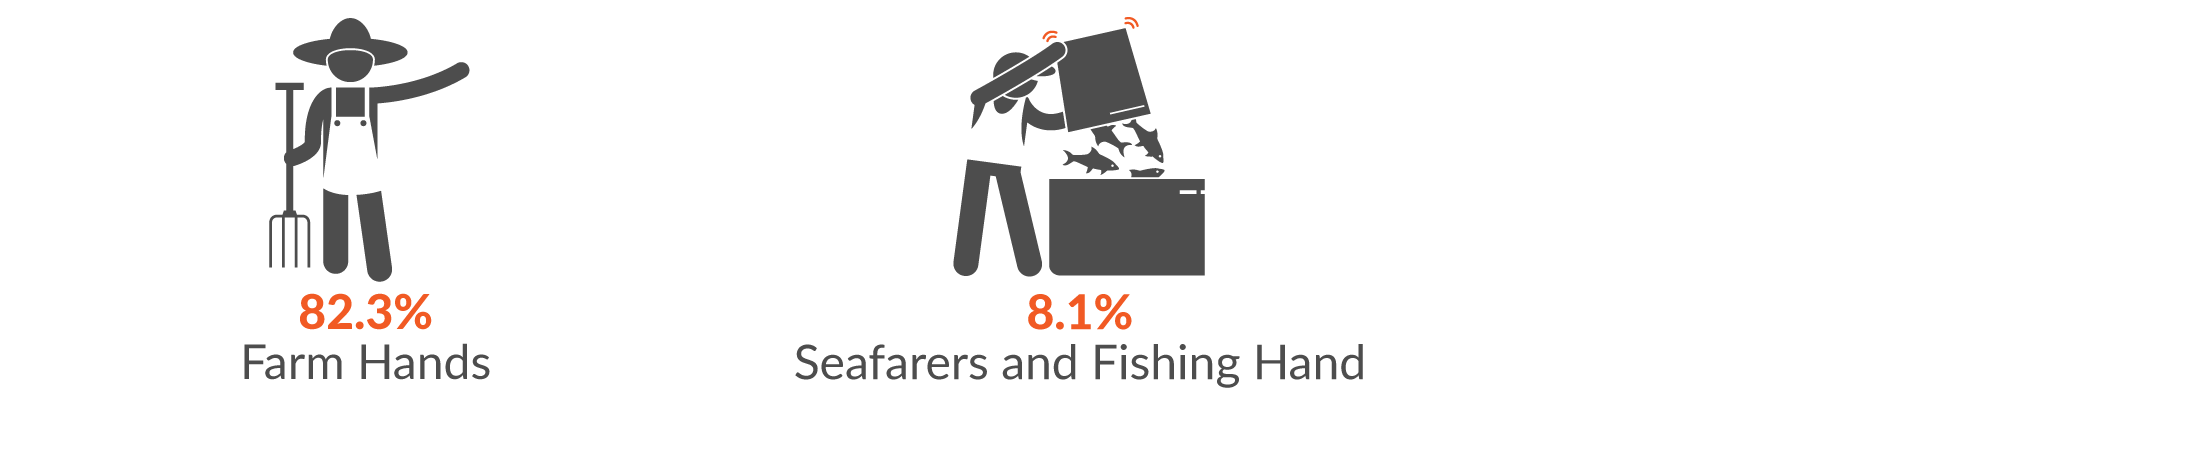 This infographic shows the main occupations by serious injury claims. 82.3% of Agriculture, forestry and fishing serious injury claims were made by a Farm Hand; and 8.1% by Seafarers and Fishing Hands.